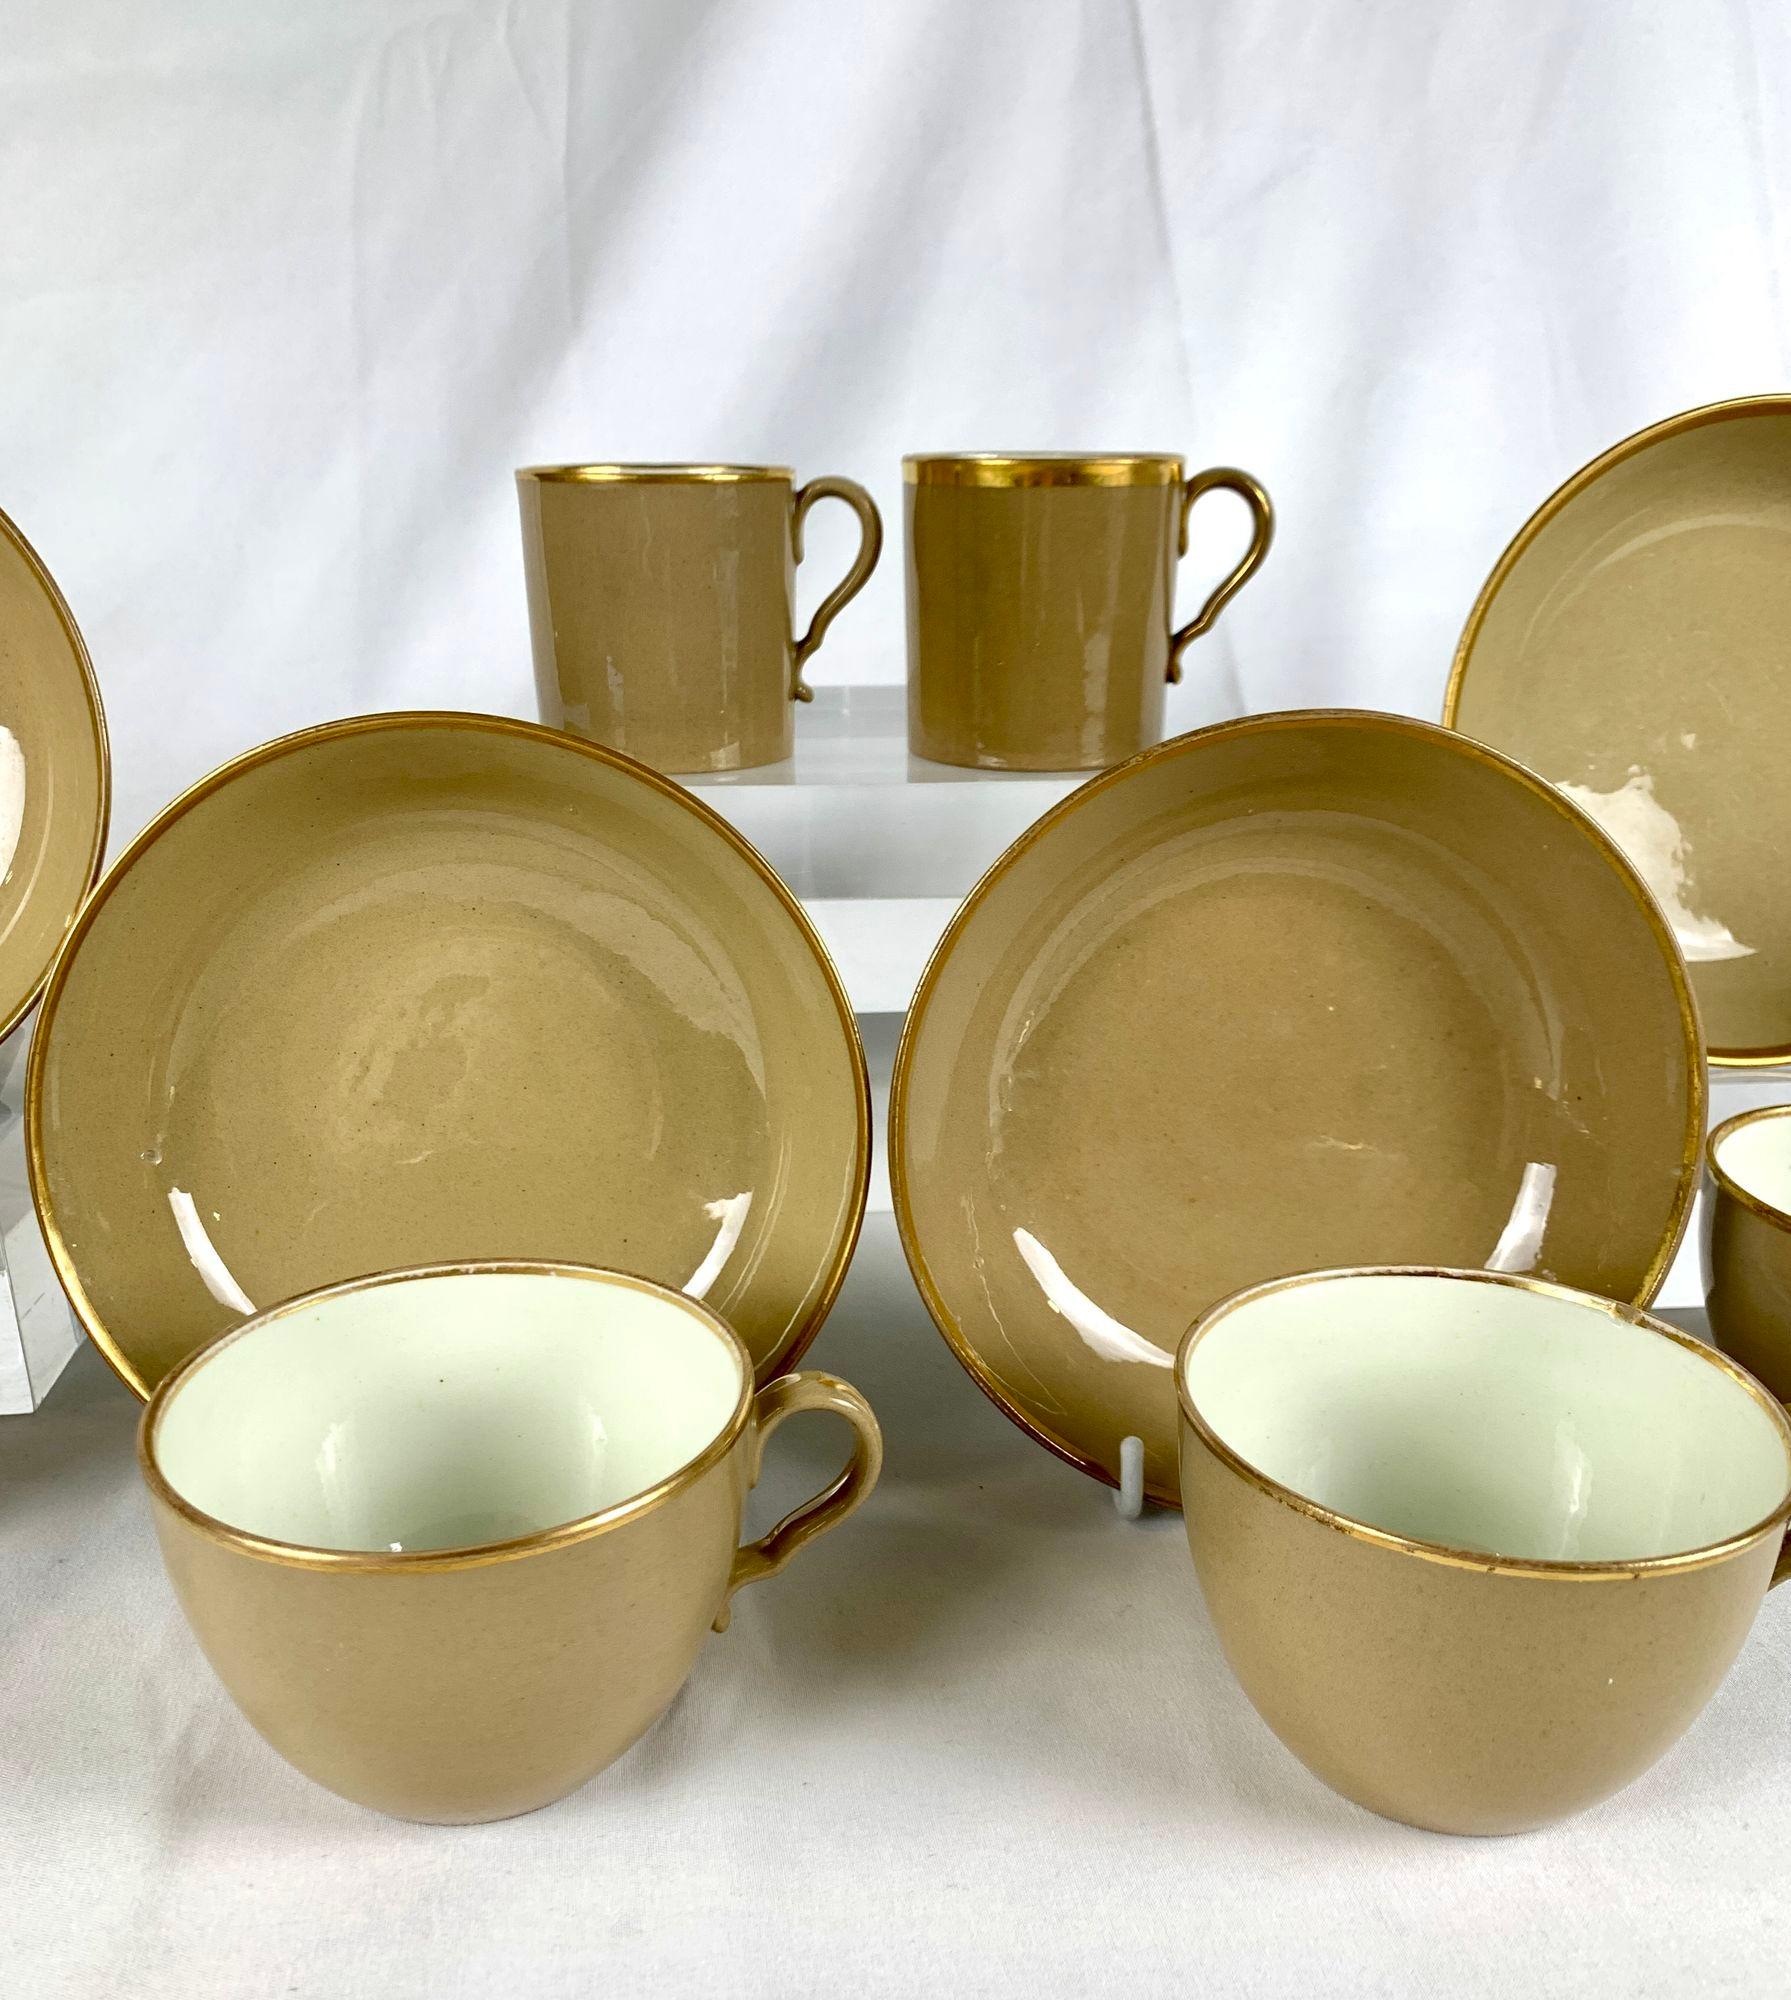 Glazed Antique Drabware Group of Cups and Saucers England Circa 1825 For Sale